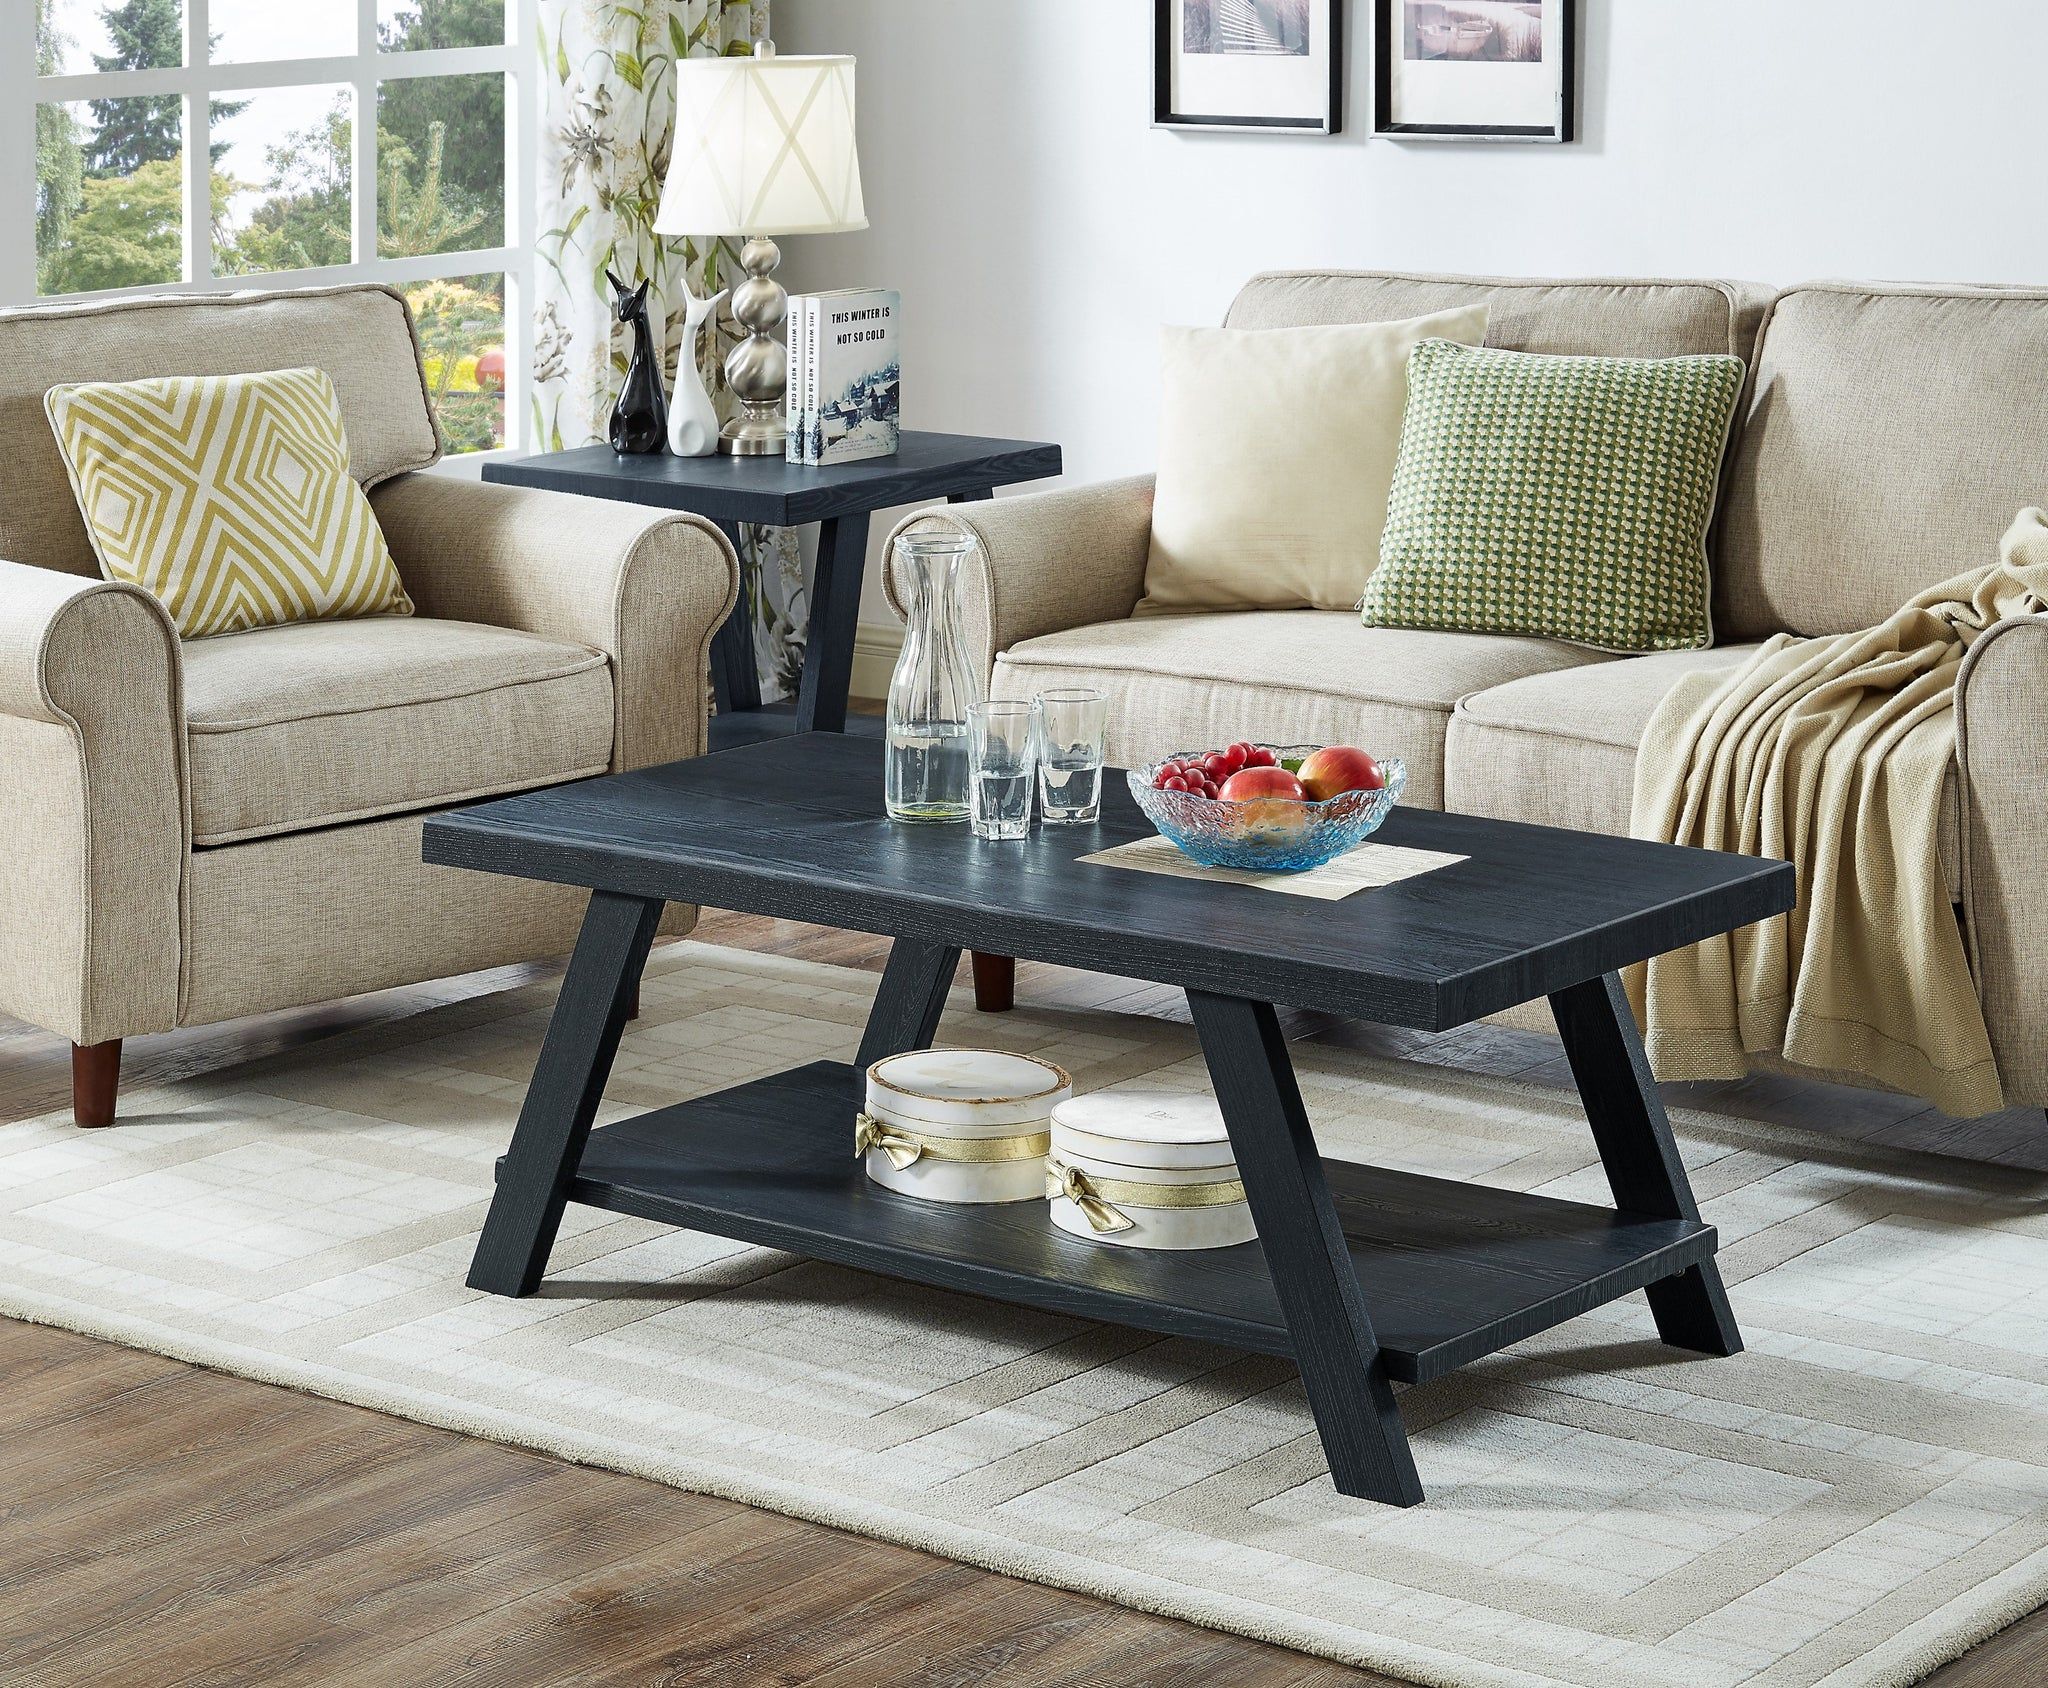 Athens Contemporary Replicated Wood Shelf Coffee Set Table In Black Fi For Pemberly Row Replicated Wood Coffee Tables (View 10 of 15)